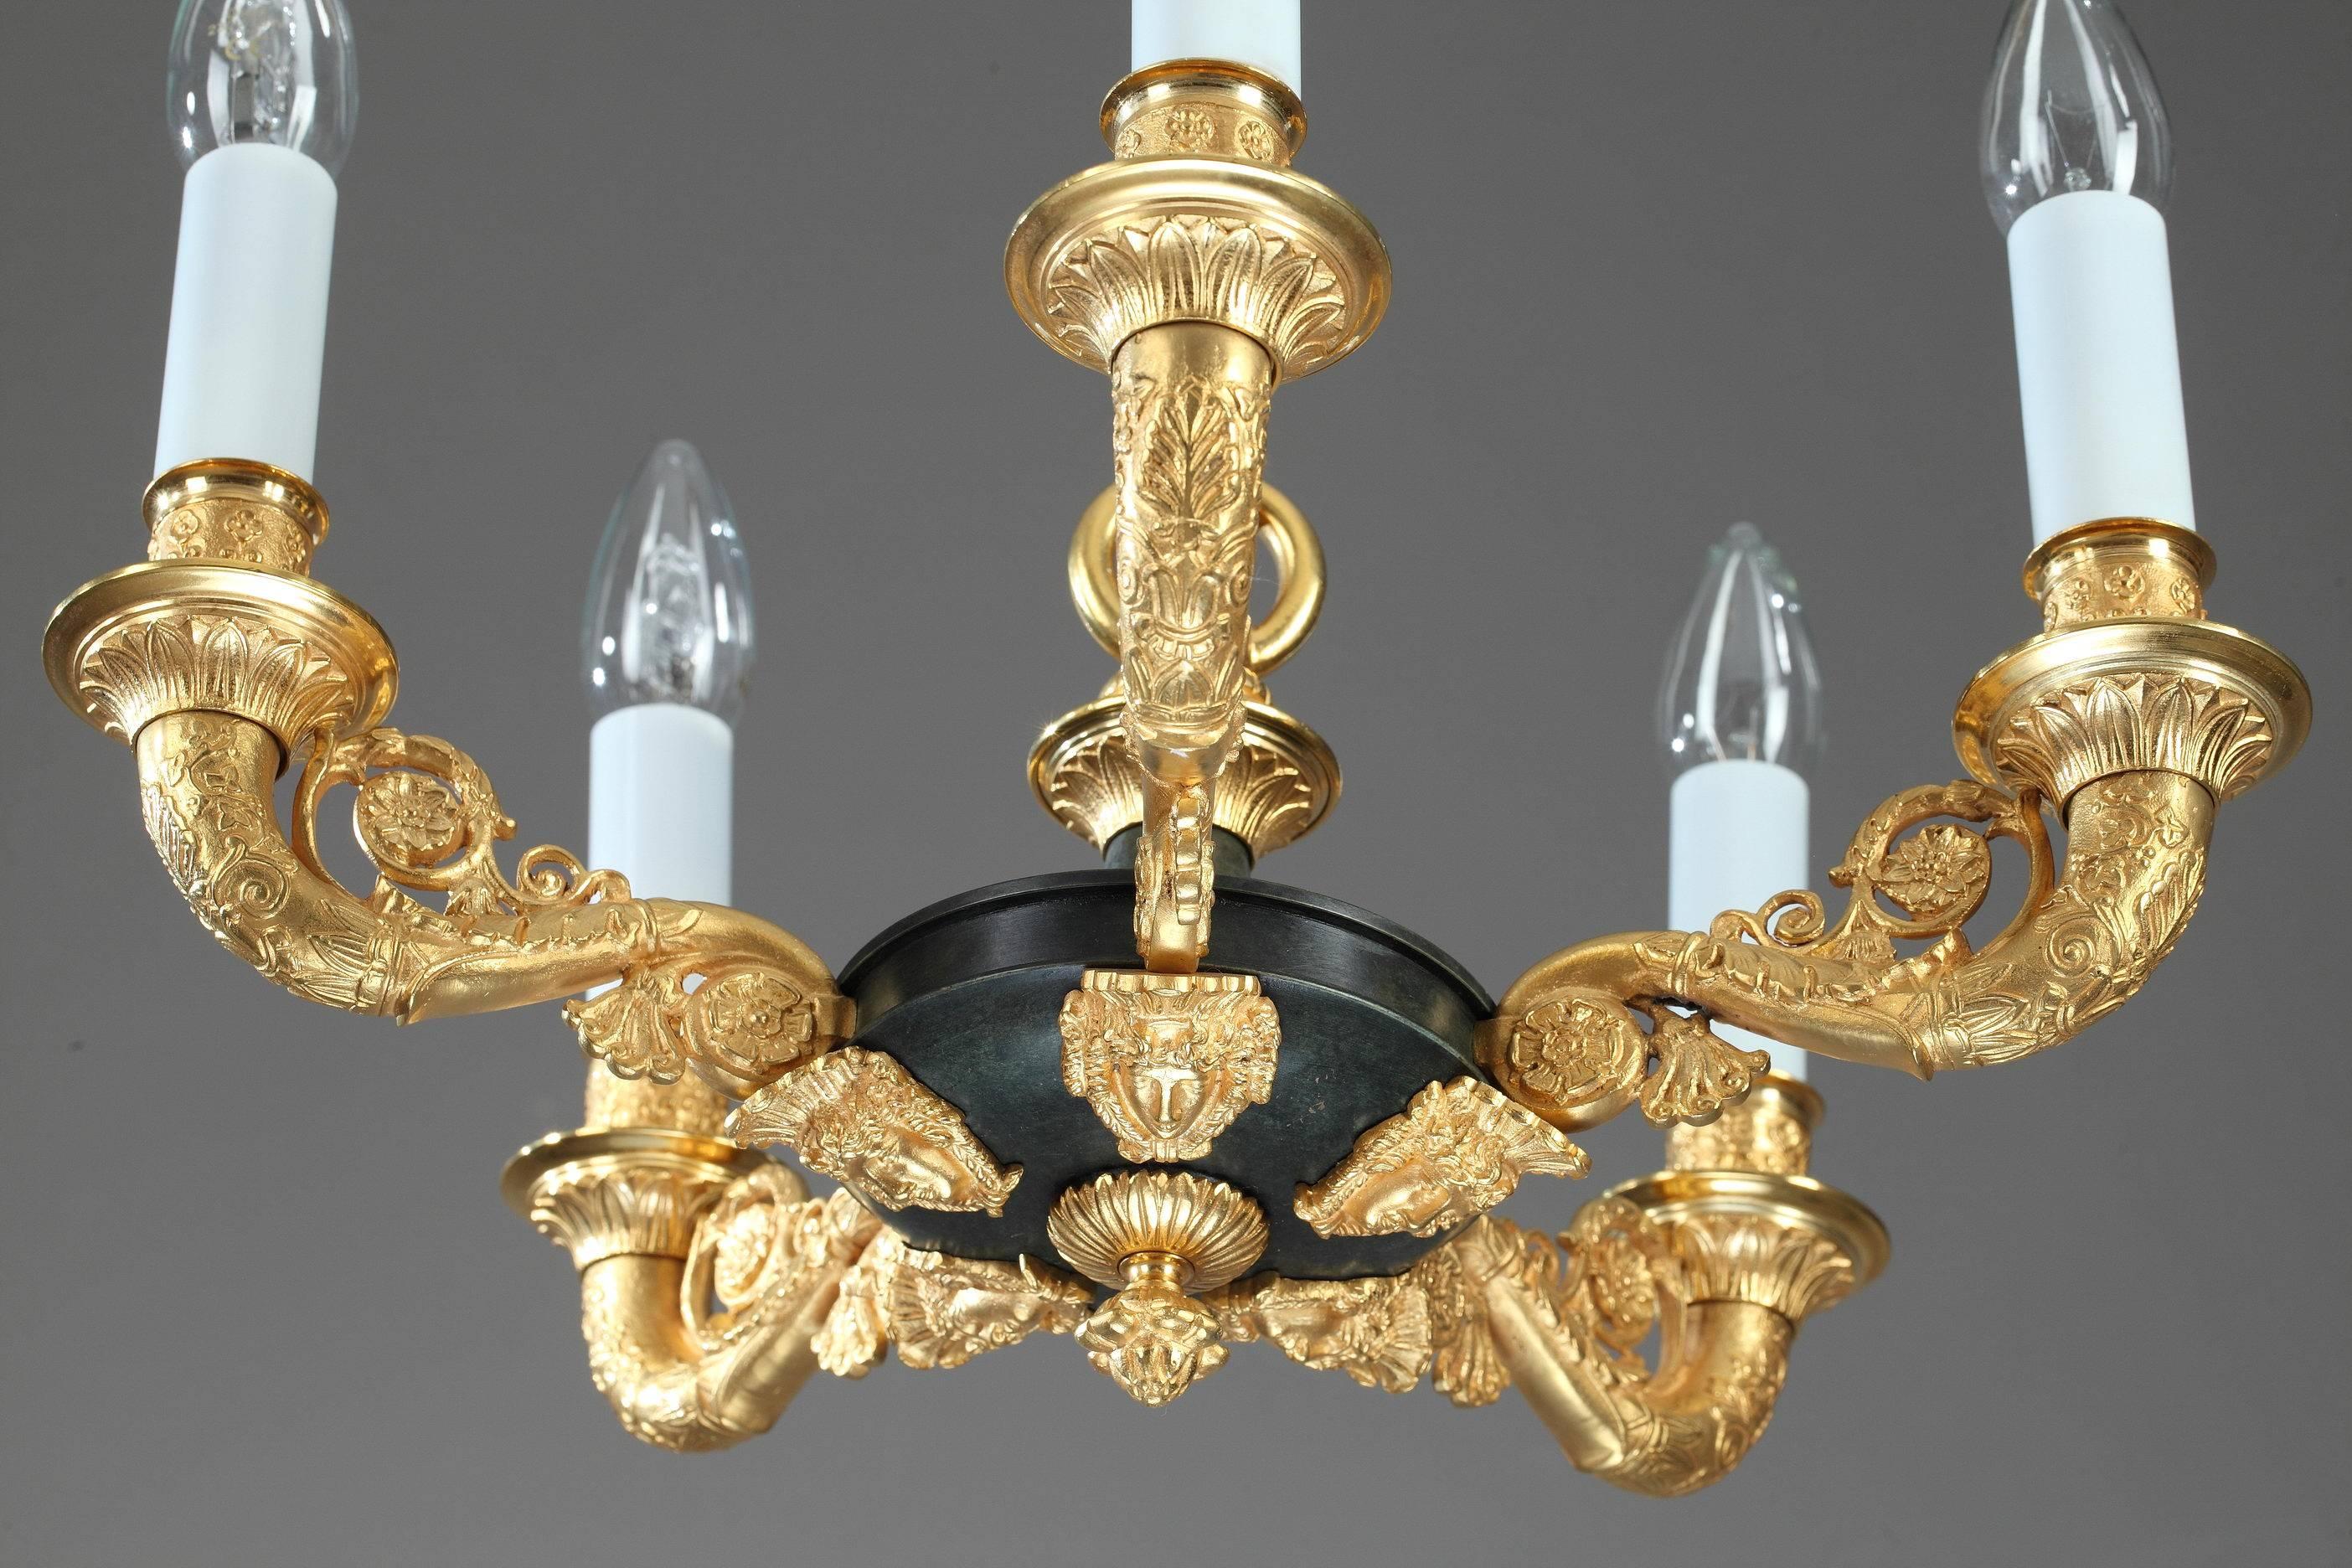 Small chandelier in gilt and patinated bronze. Its five light branches are cornucopia-shaped and are intricately sculpted with palmettes, scrolling foliage, and small flowers. The underside is embellished with masks and a pinecone finial.